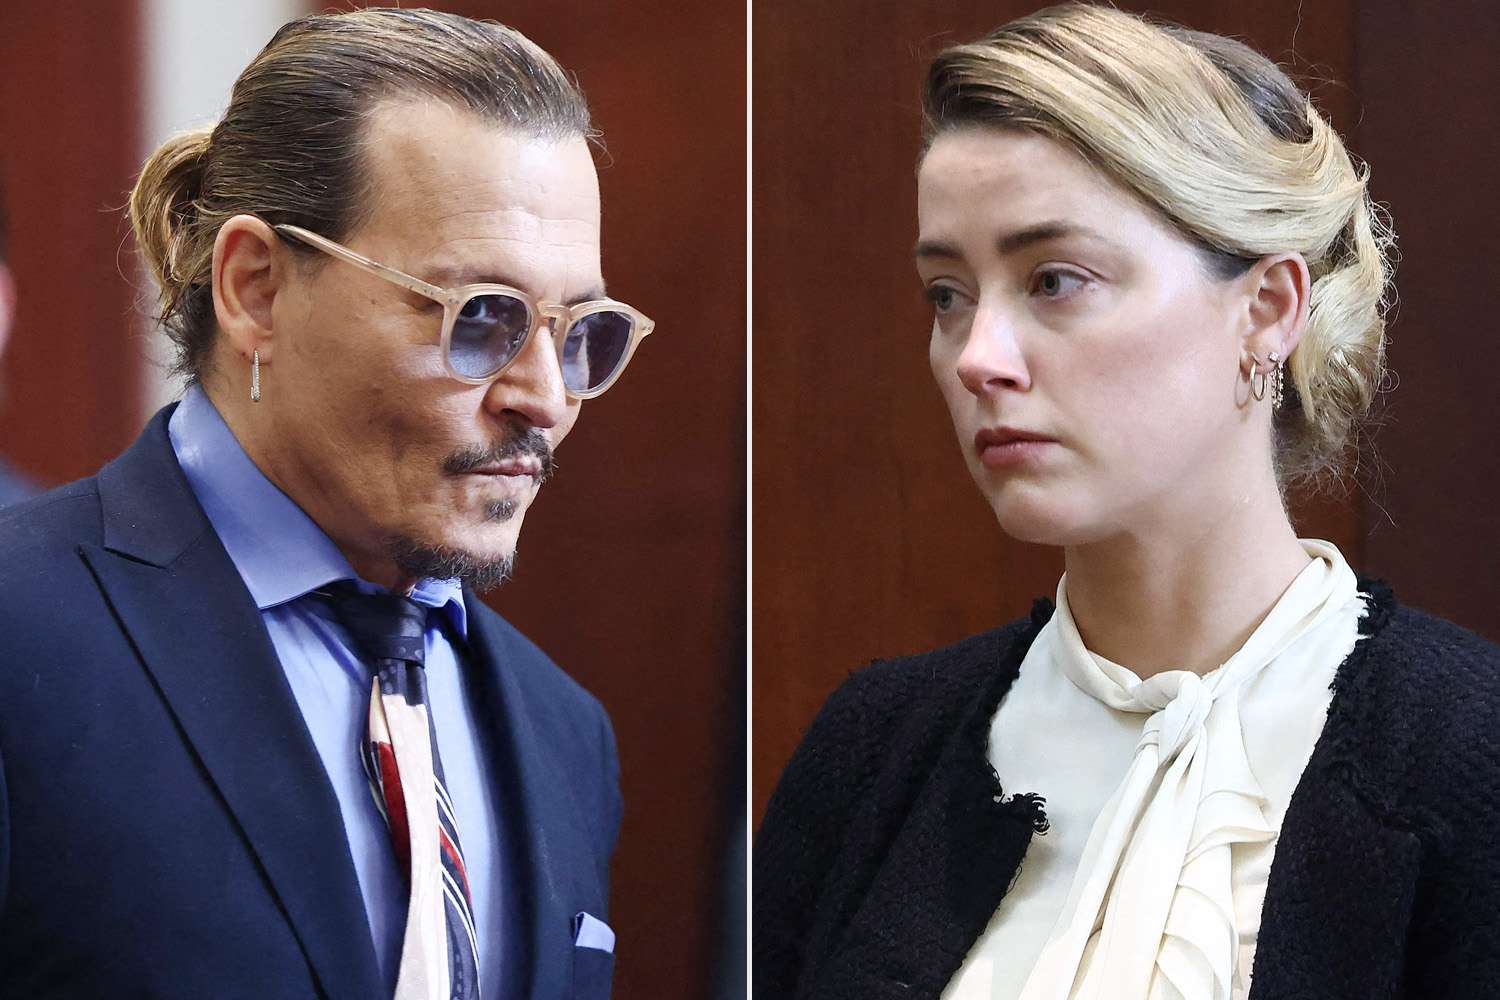 Johnny Depp leaves for a recess at the Fairfax County Circuit Courthouse in Fairfax, Virginia, on May 5, 2022. - Actor Johnny Depp is suing ex-wife Amber Heard for libel after she wrote an op-ed piece in The Washington Post in 2018 referring to herself as a public figure representing domestic abuse. (Photo by Jim LO SCALZO / POOL / AFP) (Photo by JIM LO SCALZO/POOL/AFP via Getty Images); Amber Heard (L) testifies as US actor Johnny Depp looks on during a defamation trial at the Fairfax County Circuit Courthouse in Fairfax, Virginia, on May 5, 2022. - Actor Johnny Depp is suing ex-wife Amber Heard for libel after she wrote an op-ed piece in The Washington Post in 2018 referring to herself as a public figure representing domestic abuse. (Photo by Jim LO SCALZO / POOL / AFP) (Photo by JIM LO SCALZO/POOL/AFP via Getty Images)